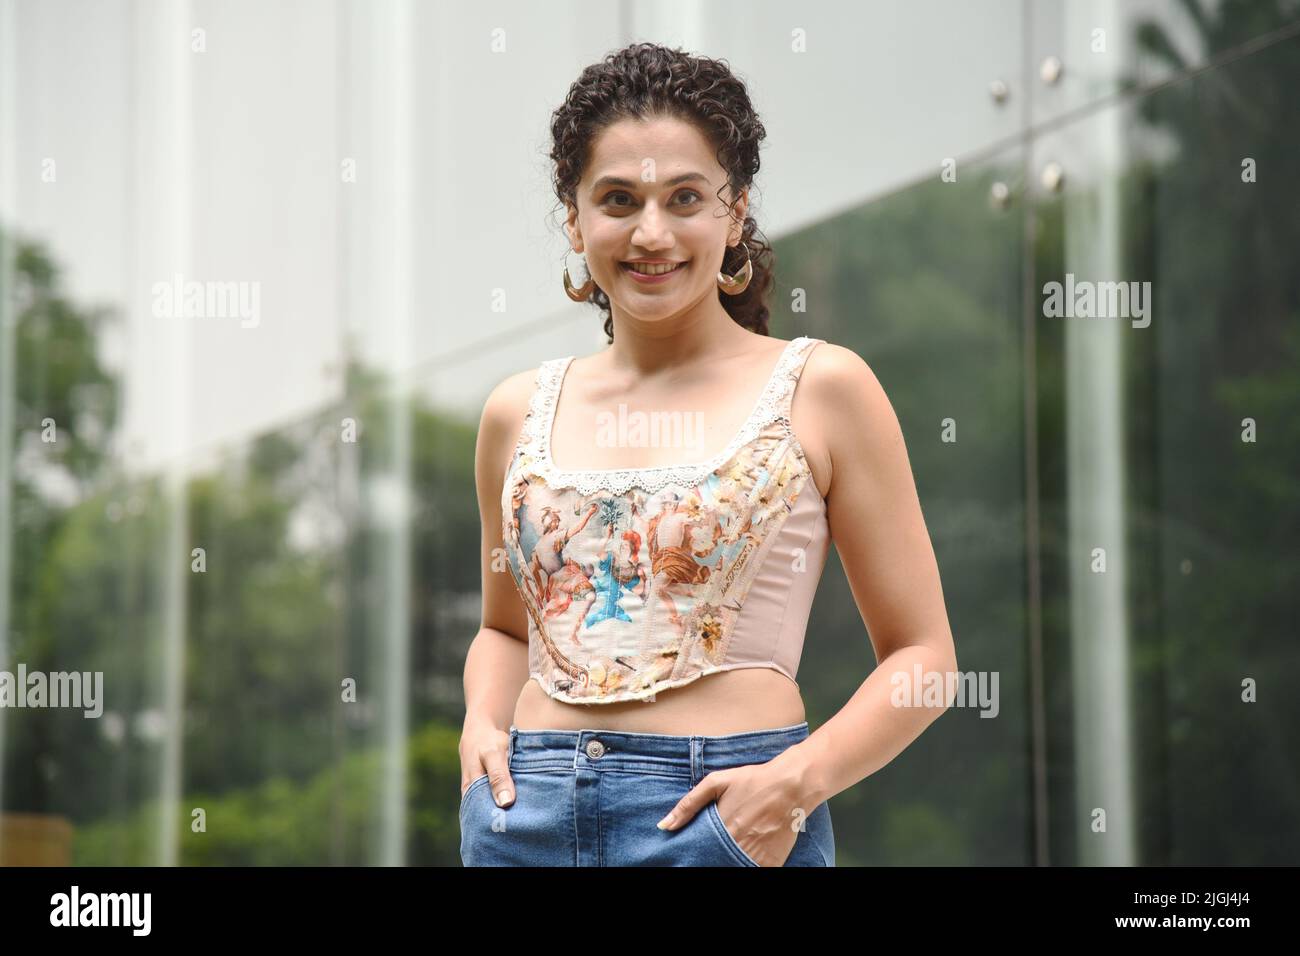 New Delhi, India. 11th July, 2022. Bollywood star Taapsee Pannu who plays the titular role in Shabaash Mithu, an upcoming Indian Hindi-language biographical sports drama film based on the life of former Test and One Day International (ODI) captain of the India women's national cricket team, Mithali Raj in New Delhi. (Photo by Sondeep Shankar/Pacific Press) Credit: Pacific Press Media Production Corp./Alamy Live News Stock Photo